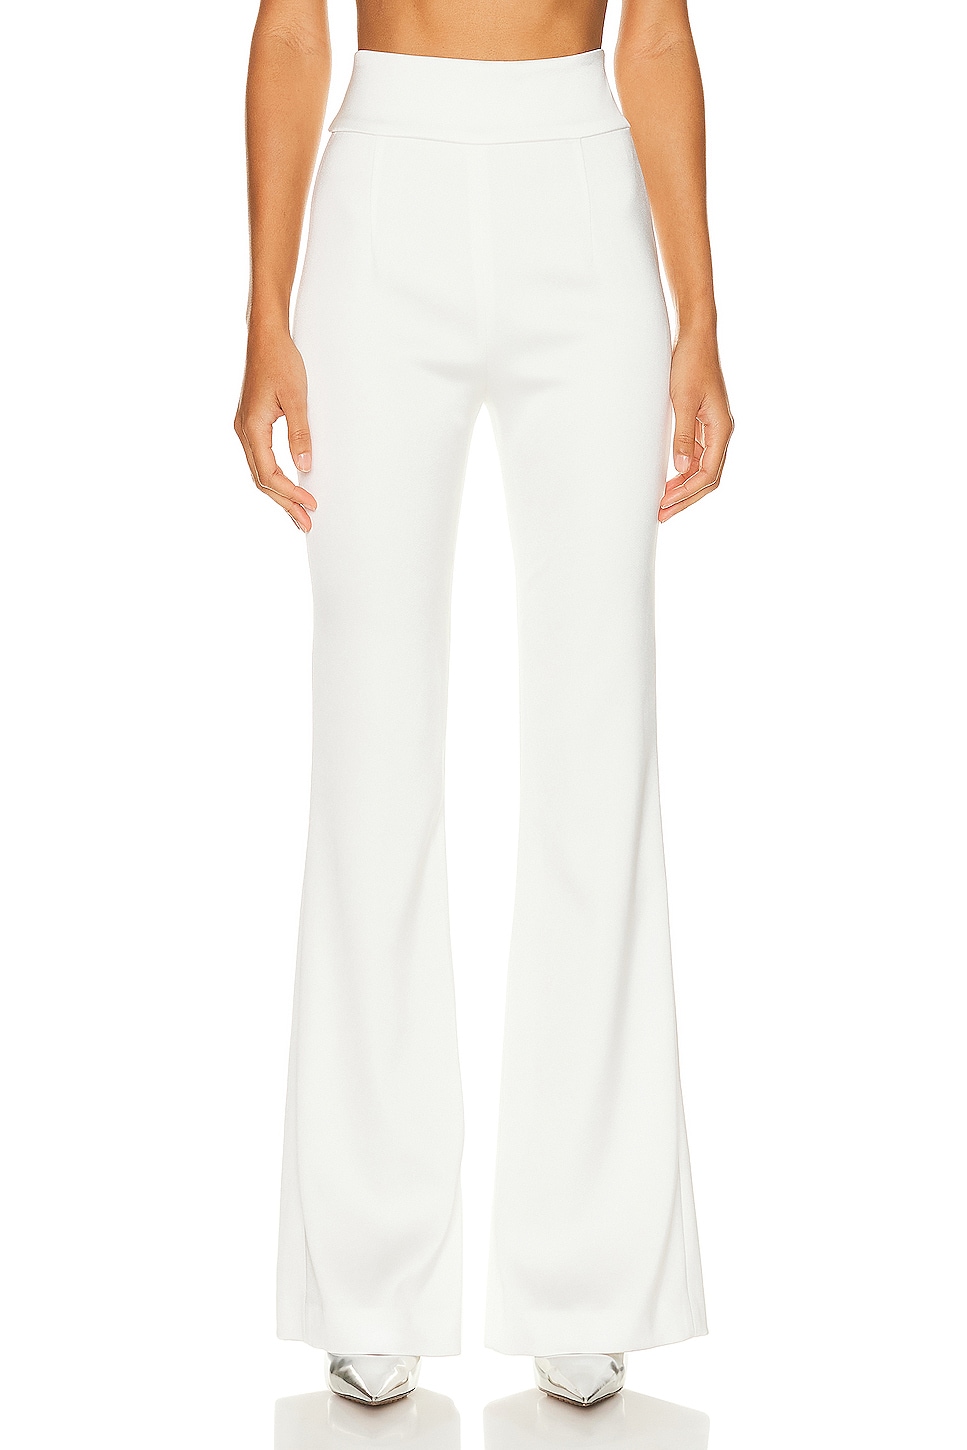 Sculpted Bridal Trouser in White